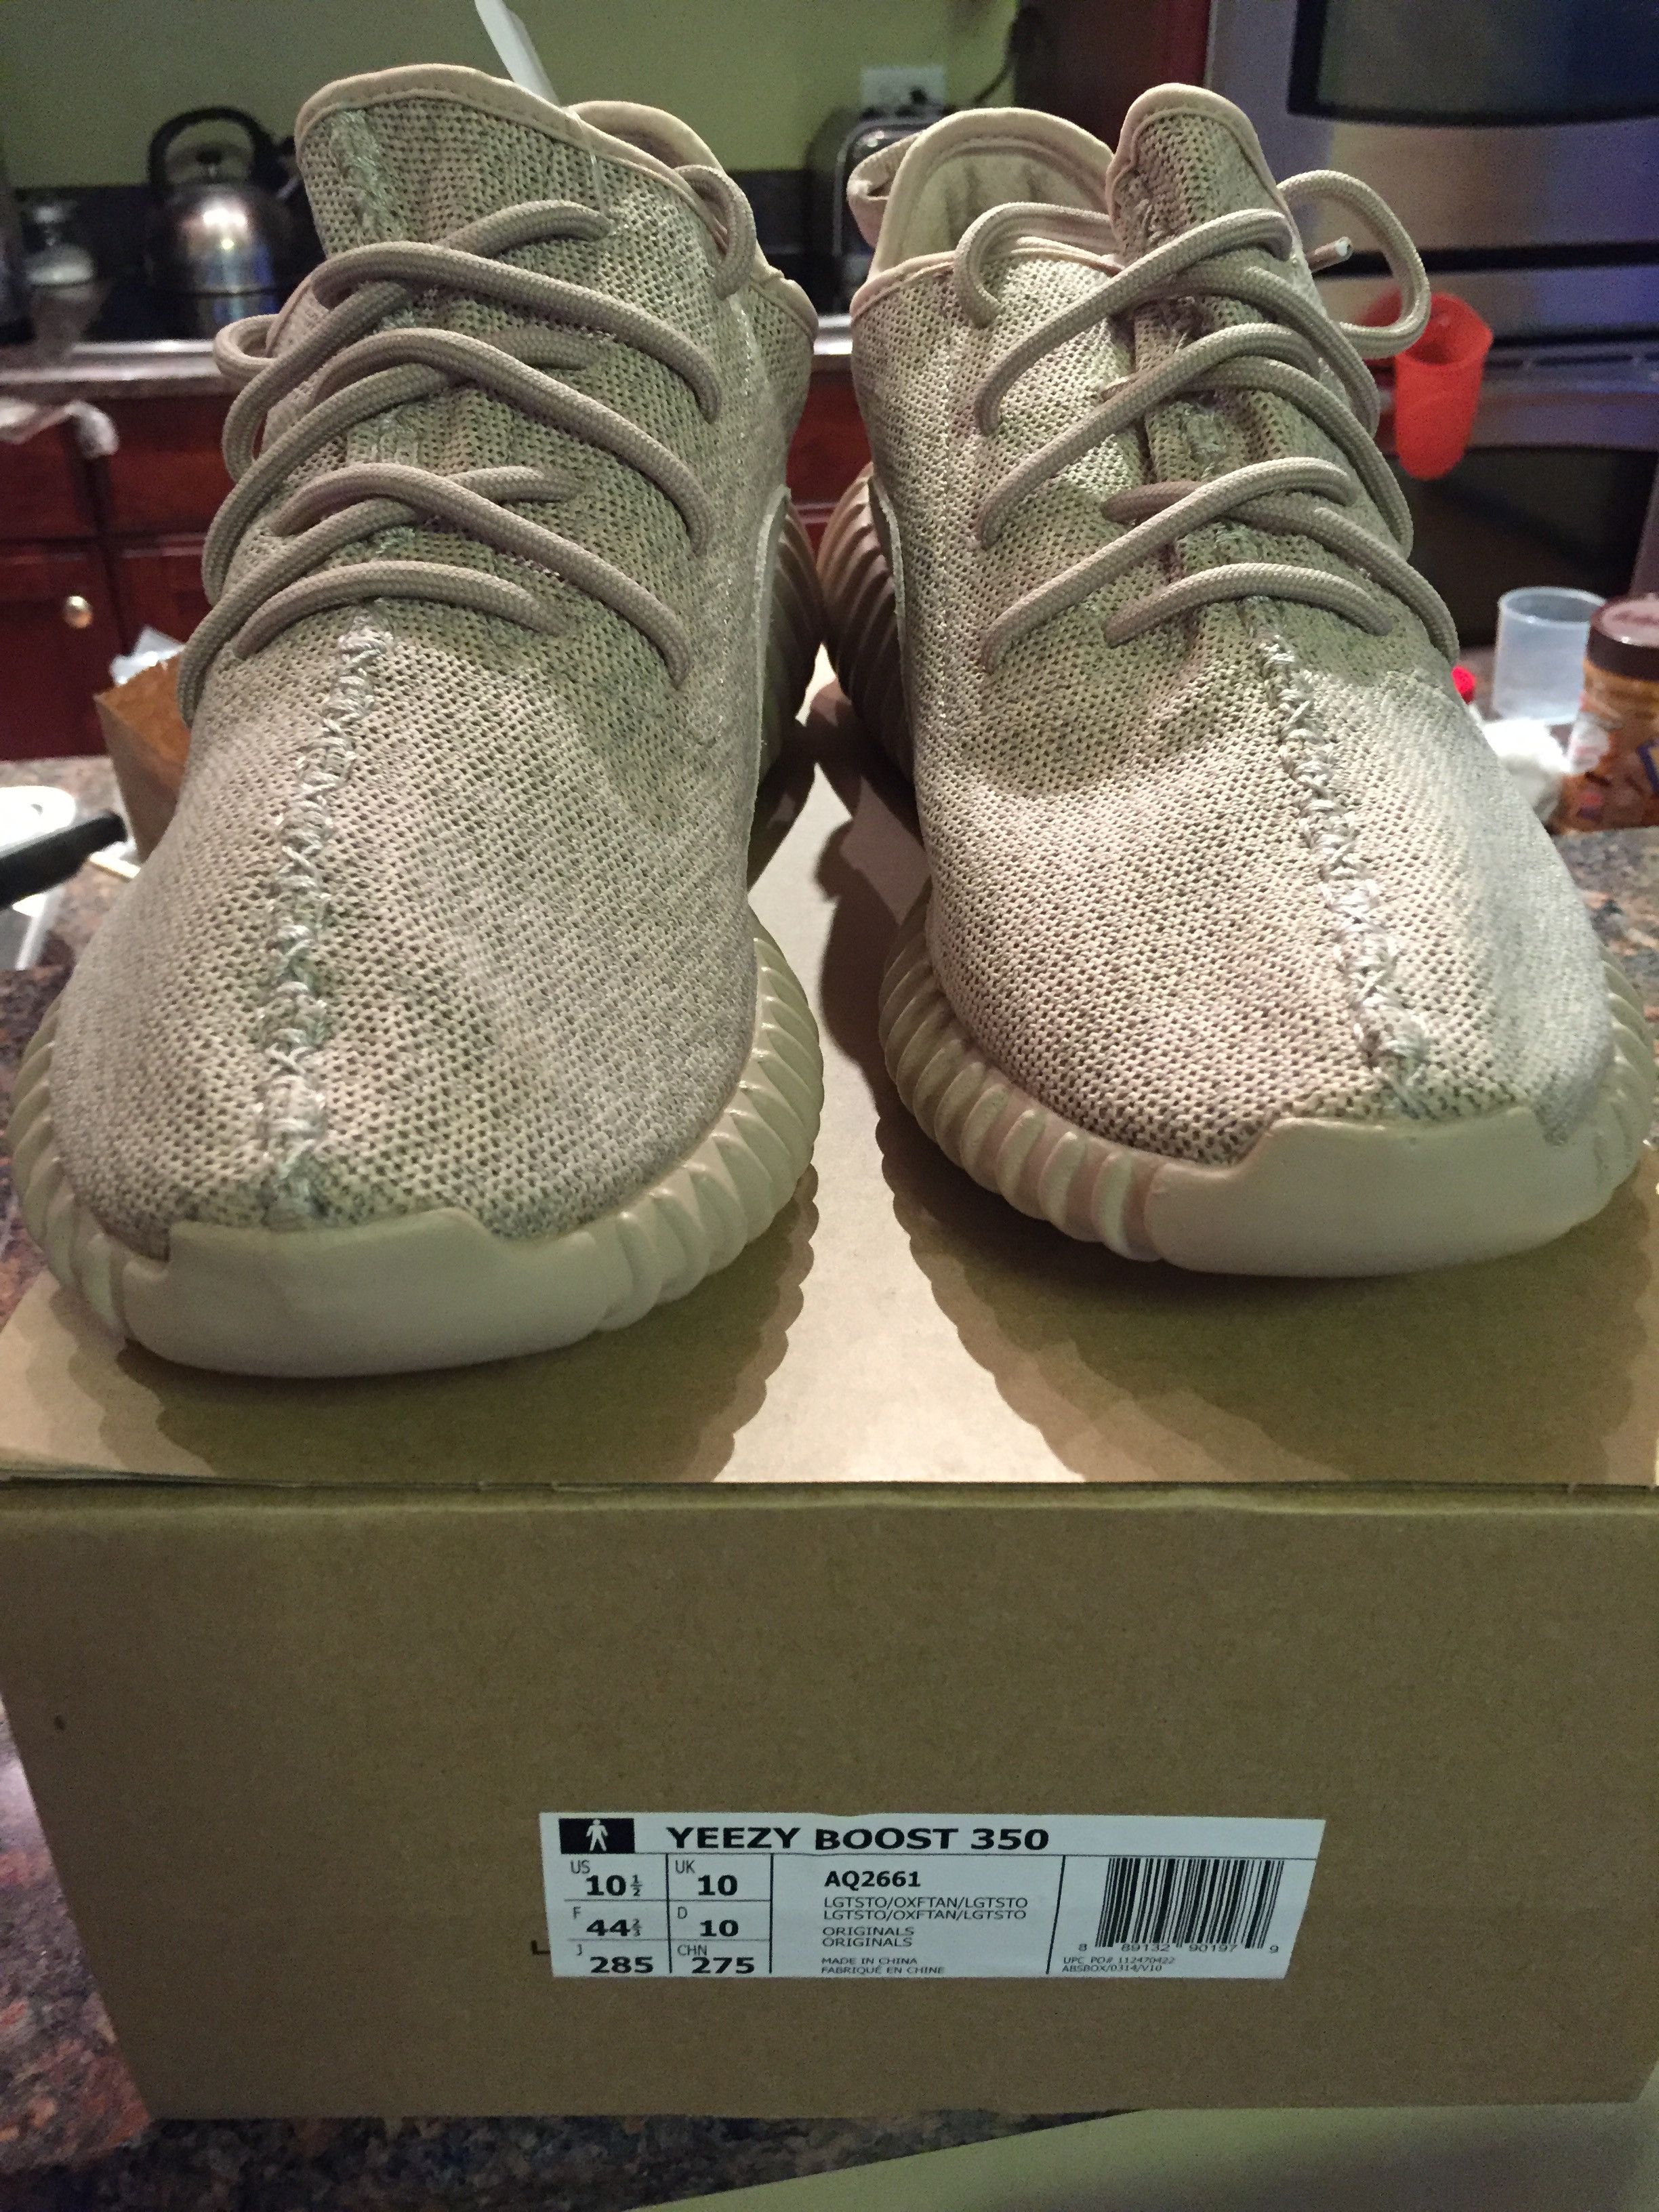 Adidas Yeezy 350 Oxford Tans - NEW Size US 10.5 / EU 43-44 - 1 Preview